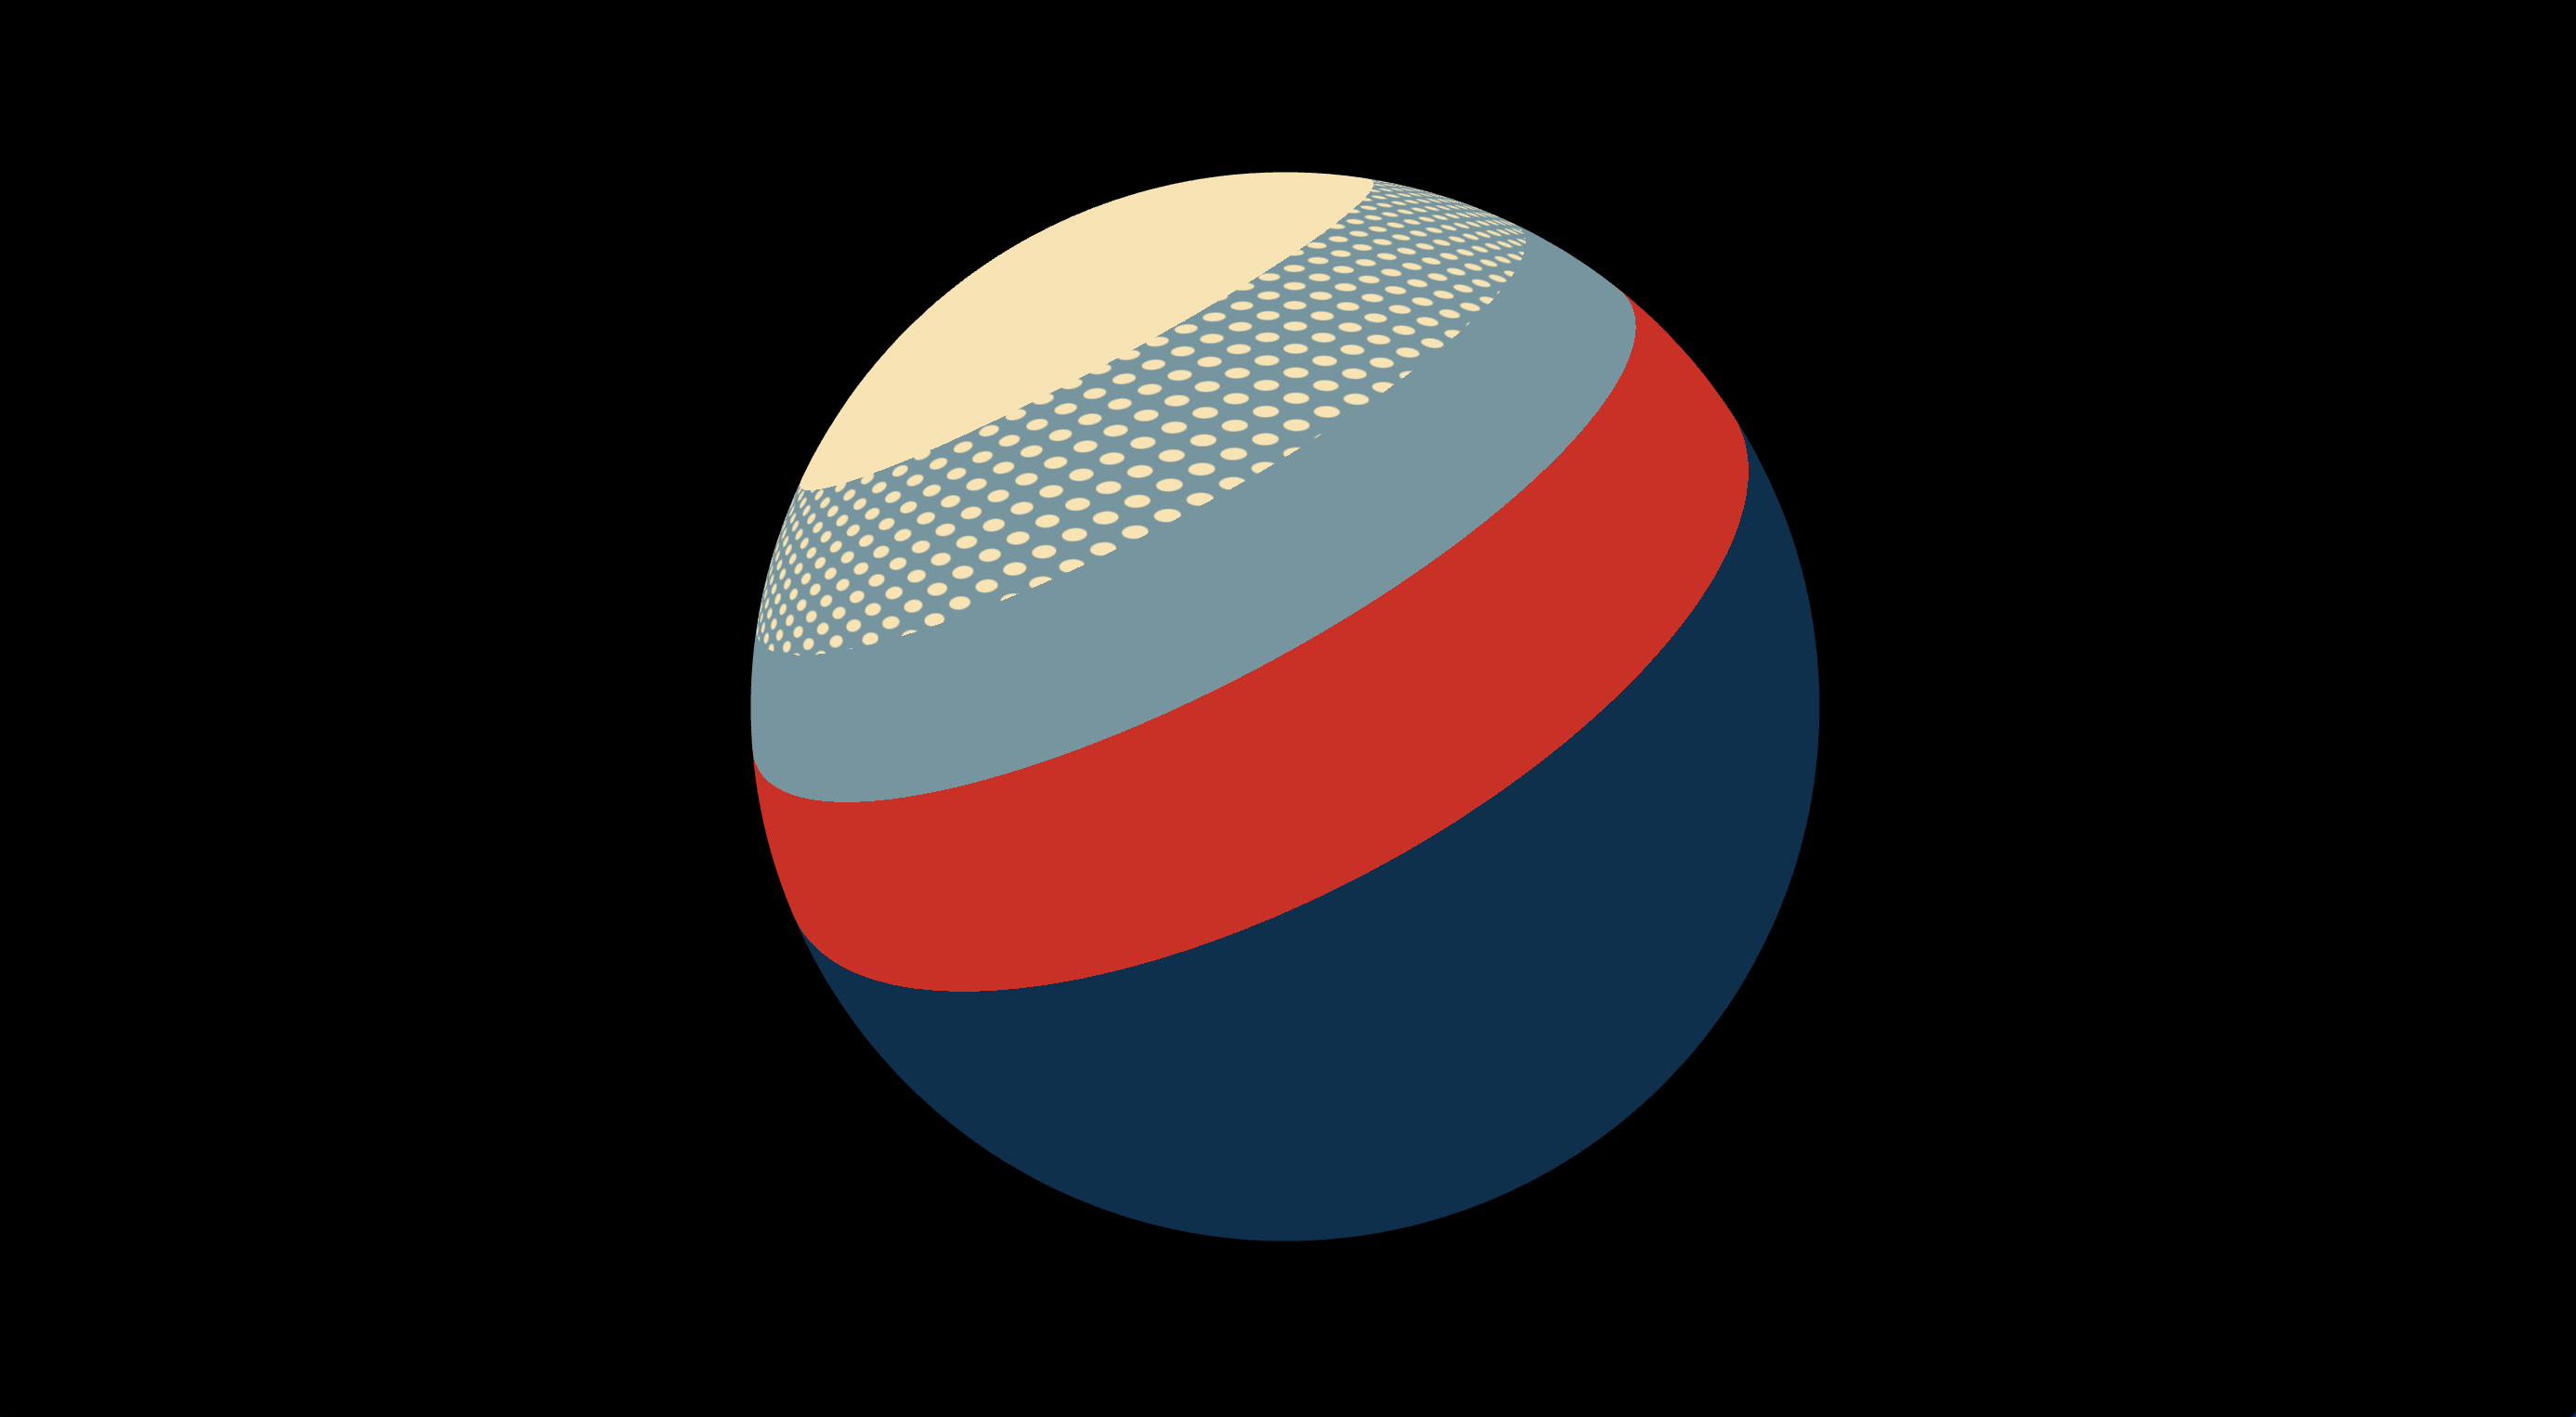 Sphere colored like the Obama Hope Poster